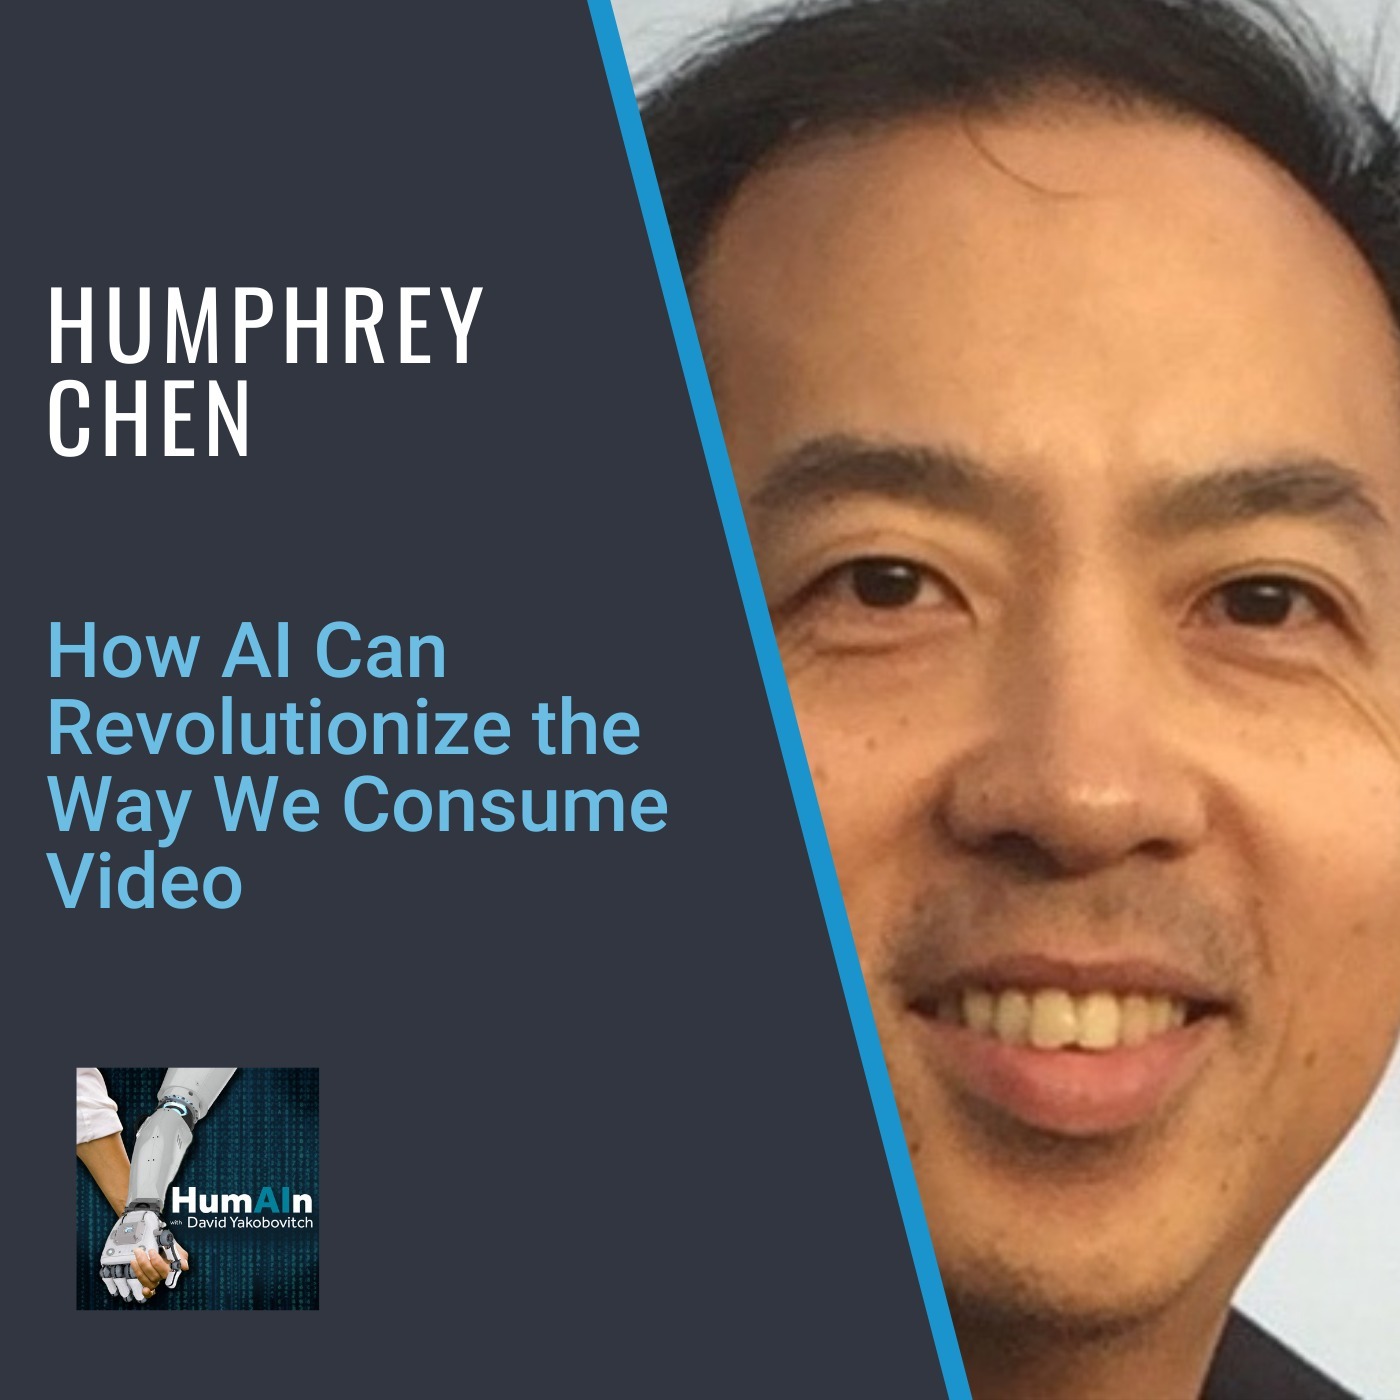 Humphrey Chen: How AI Can Revolutionize the Way We Consume Video